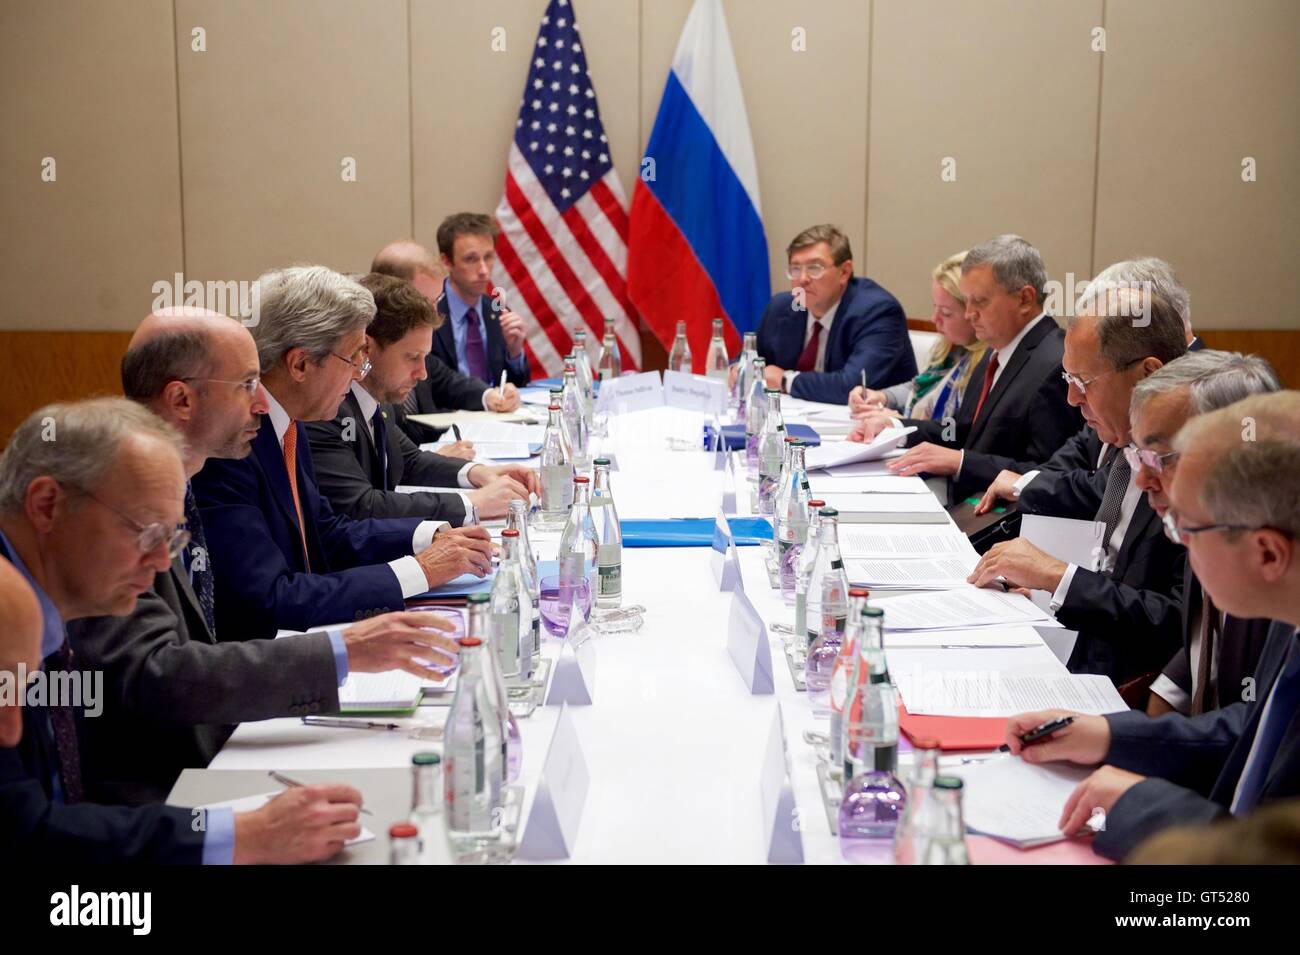 U.S Secretary of State John Kerry and Russian Foreign Minister Sergey Lavrov during a bilateral meeting focused on the Syrian civil war at the Hotel President Wilson September 9, 2016 in Geneva, Switzerland. Stock Photo